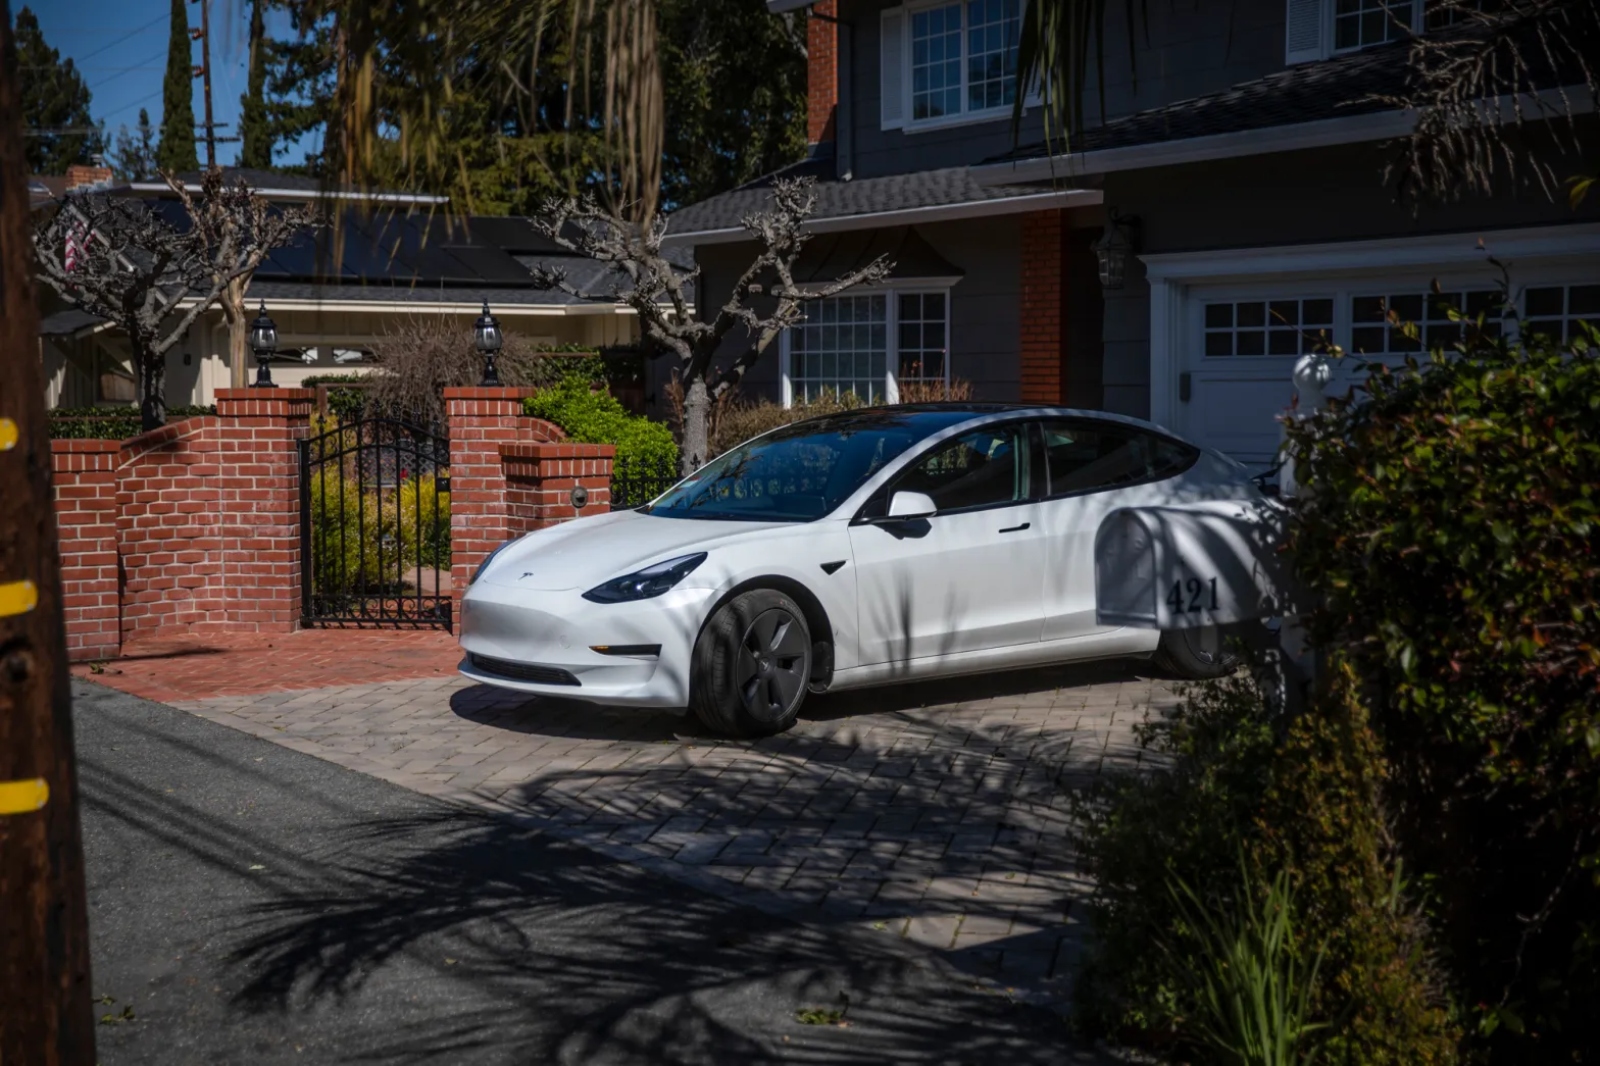 A white Tesla is parked outside of a home.